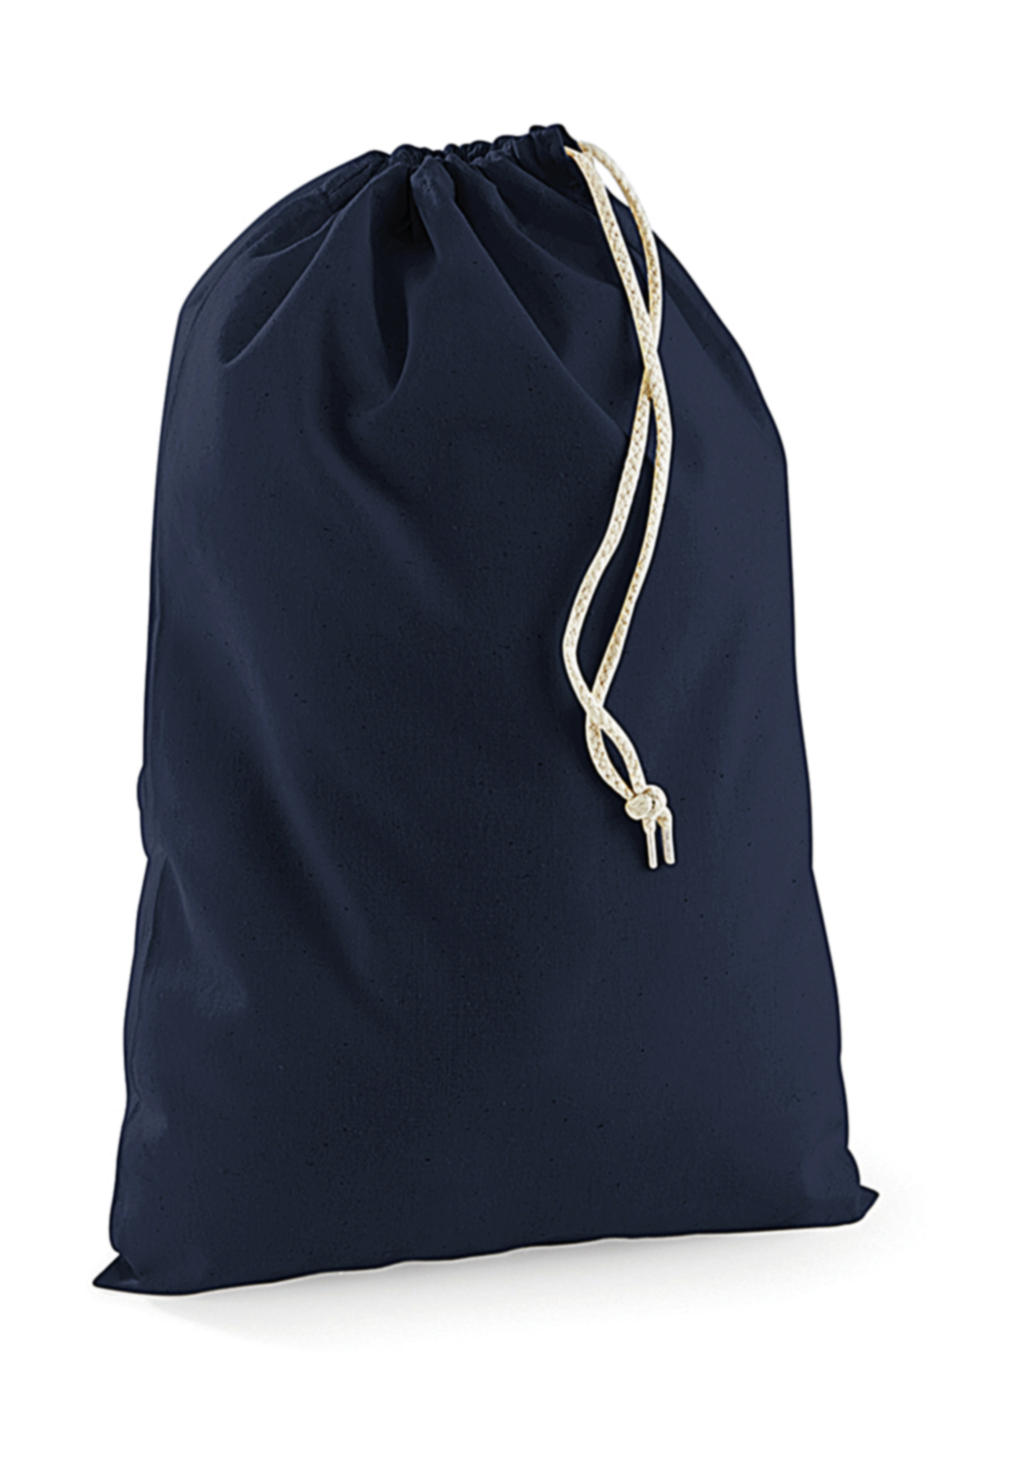  Cotton Stuff Bag in Farbe Navy